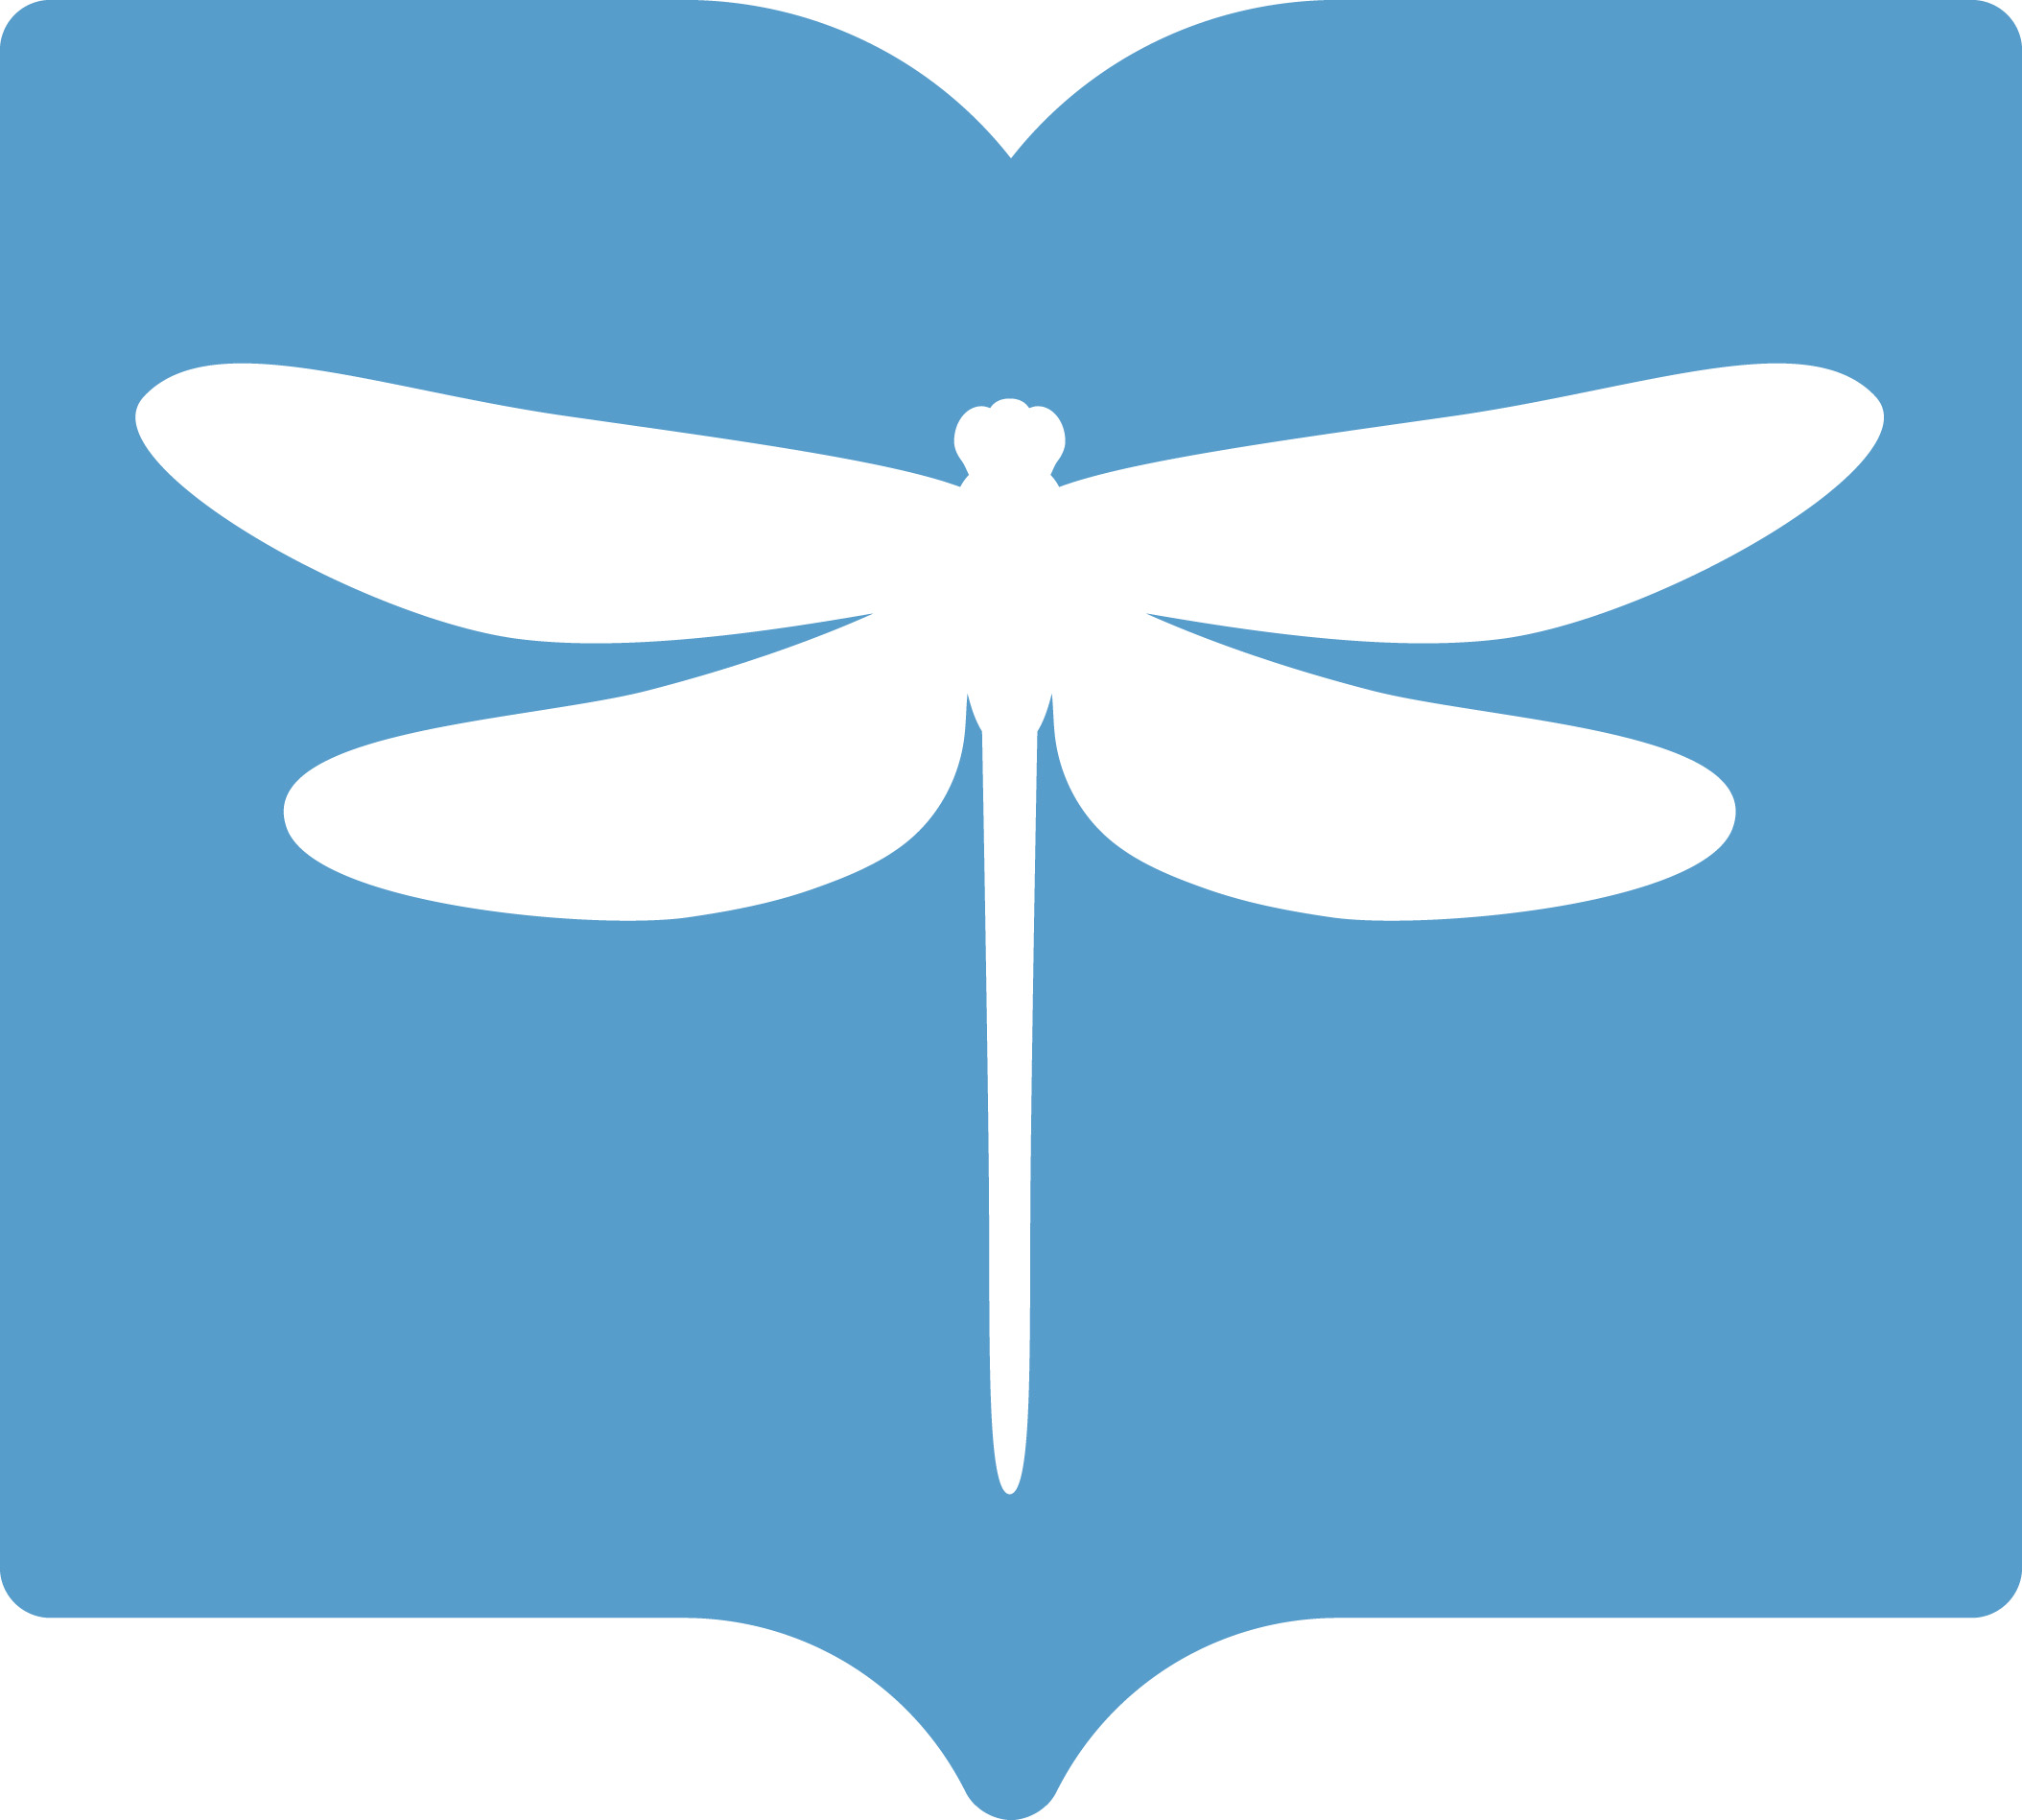 An open book with a dragonfly superimposed over the top. The book is a light blue, and the dragonfly is white.